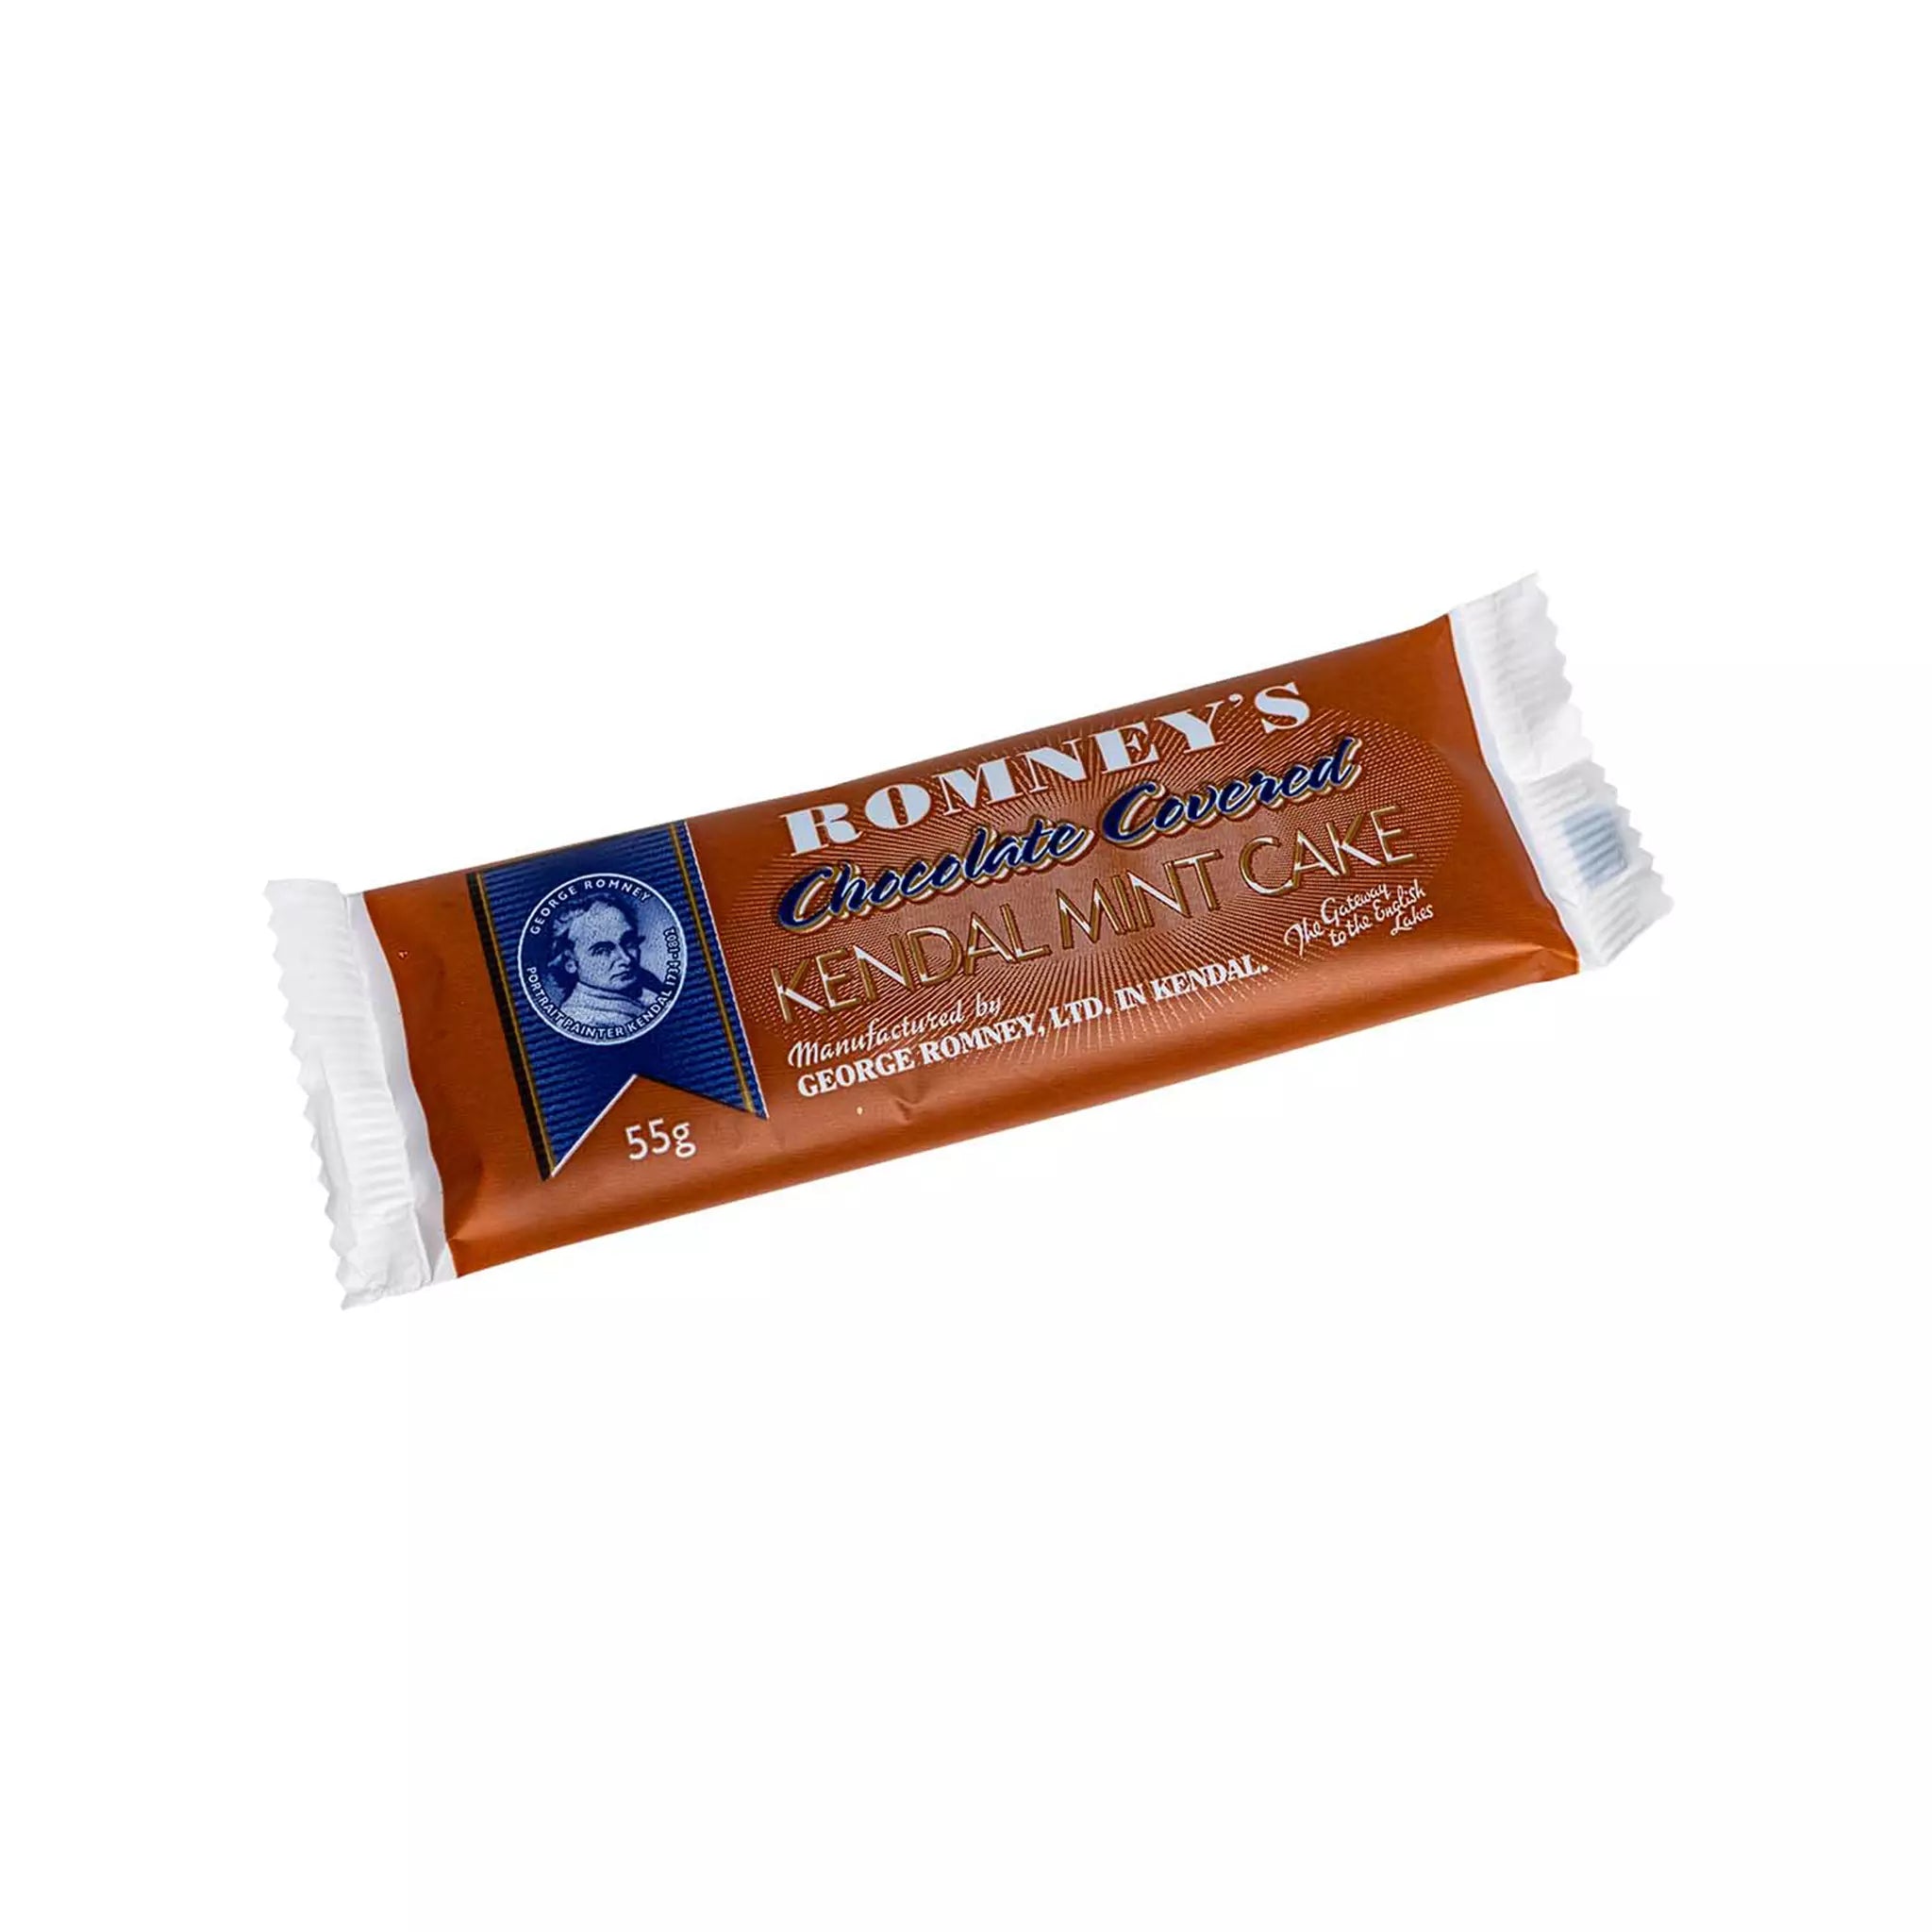 A product image of a wrapped 55g Romney's Chocolate Coated Kendal Mint Cake bar. The wrapper is brown and white, features the Romney's logo and the words 'Romney's Kendal Mint Cake'.